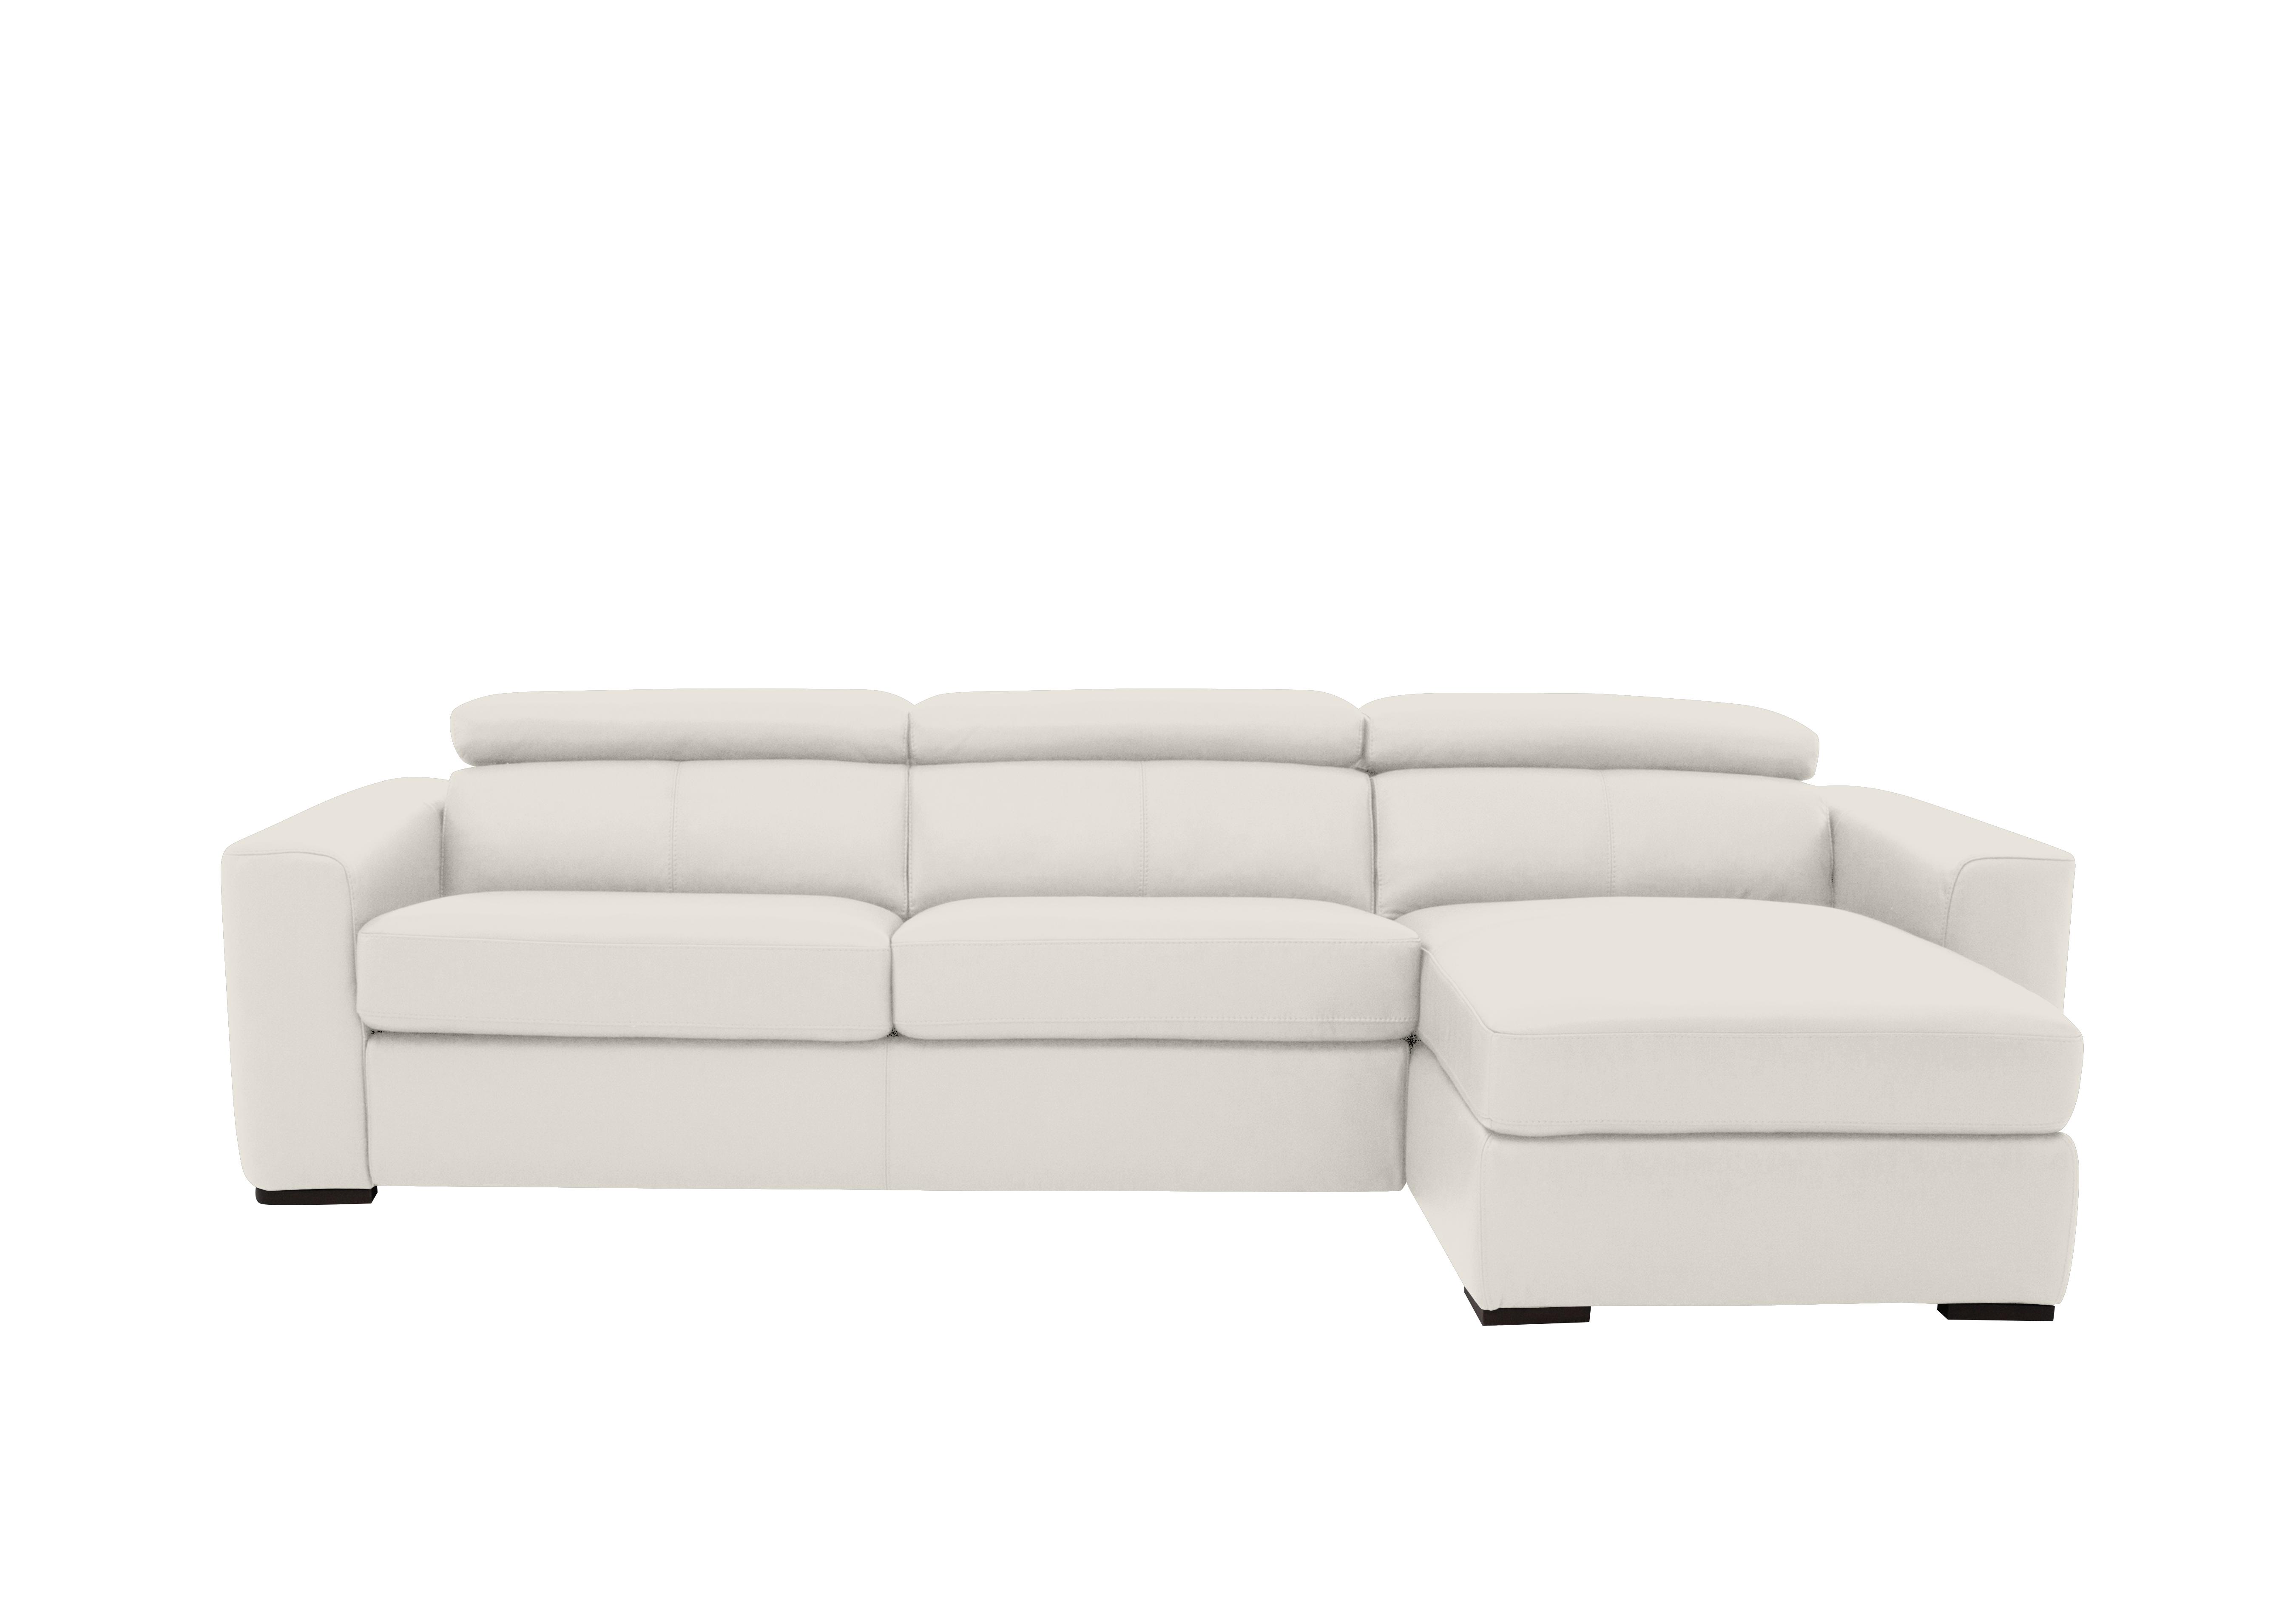 Infinity Leather Corner Chaise Sofa with Storage in Bv-744d Star White on Furniture Village